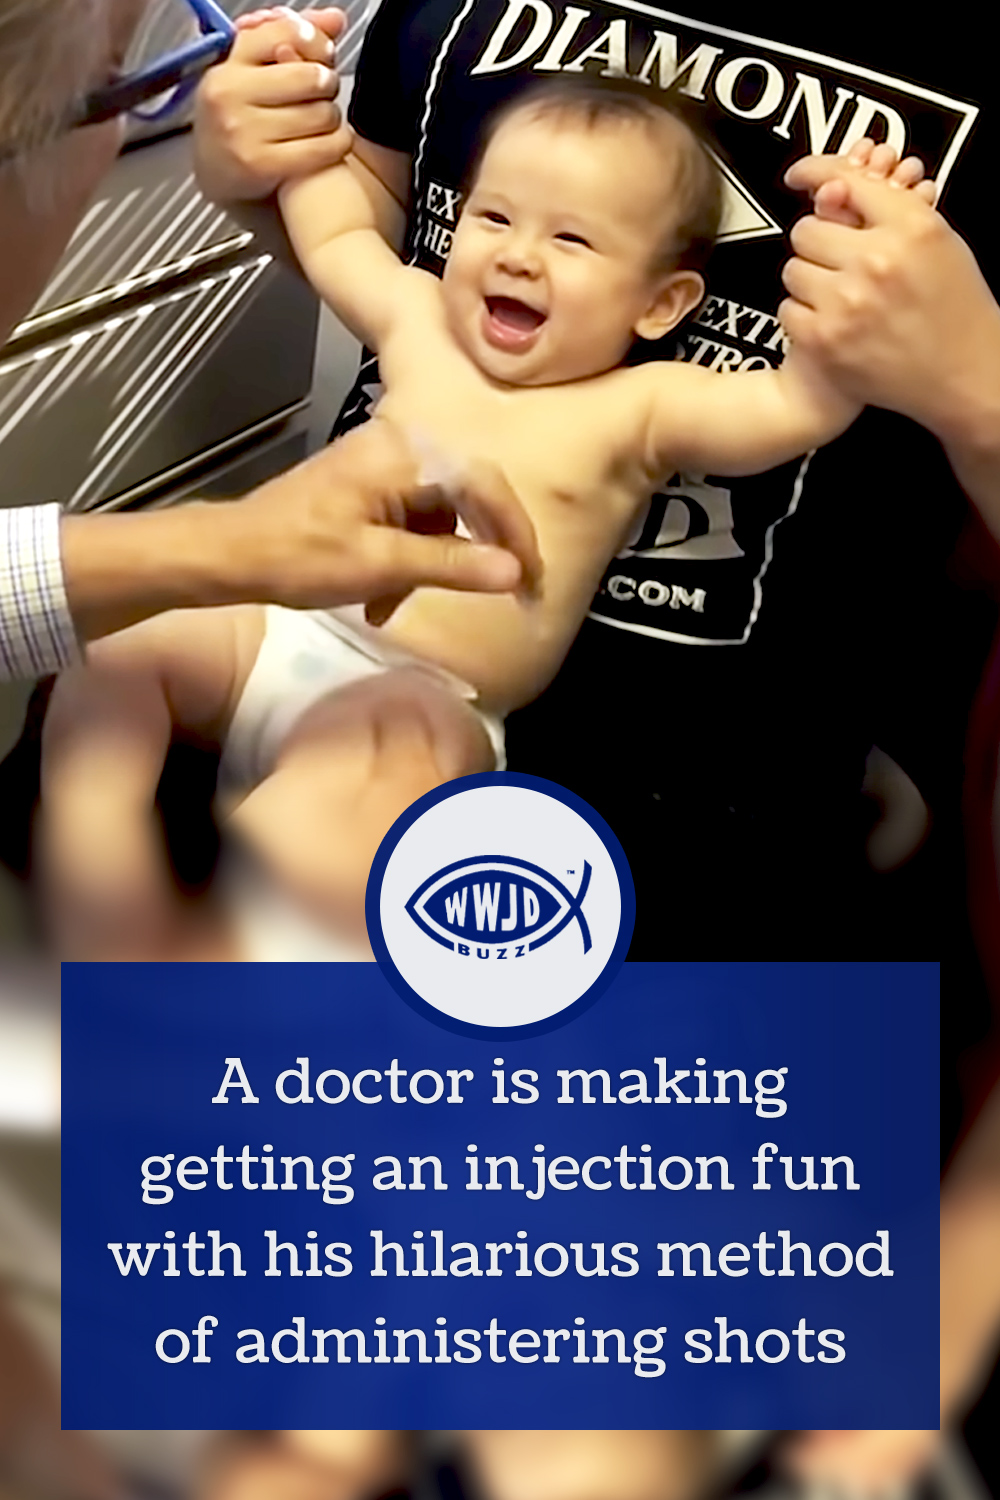 A doctor is making getting an injection fun with his hilarious method of administering shots